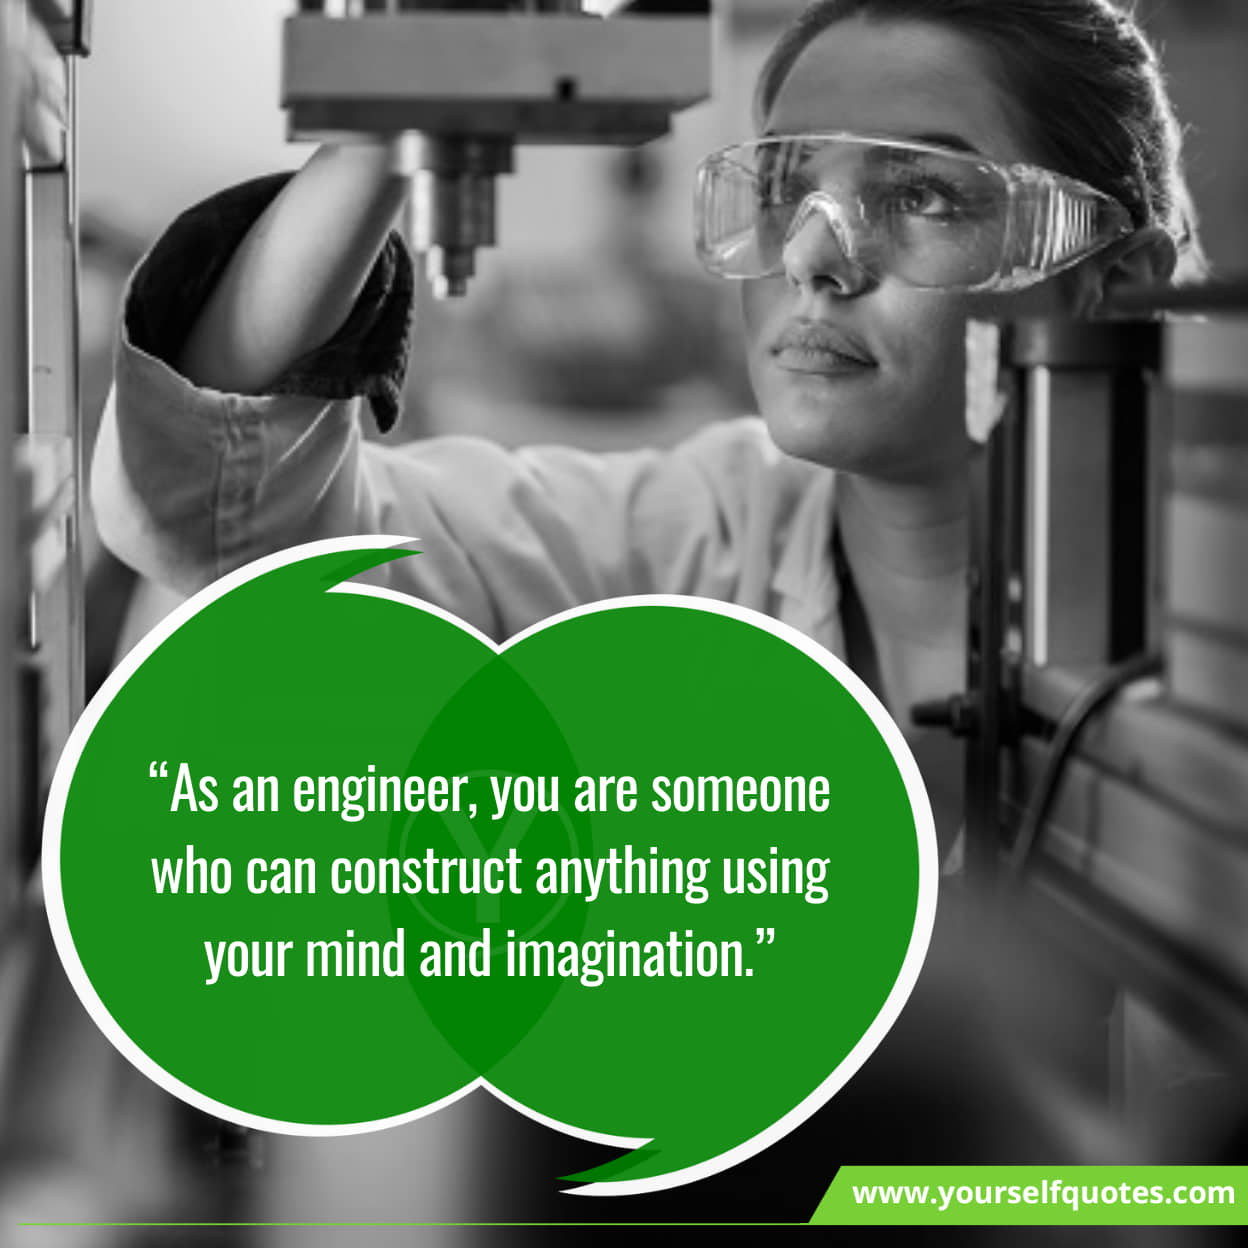 Latest Inspirational Quotes For National Engineers Day